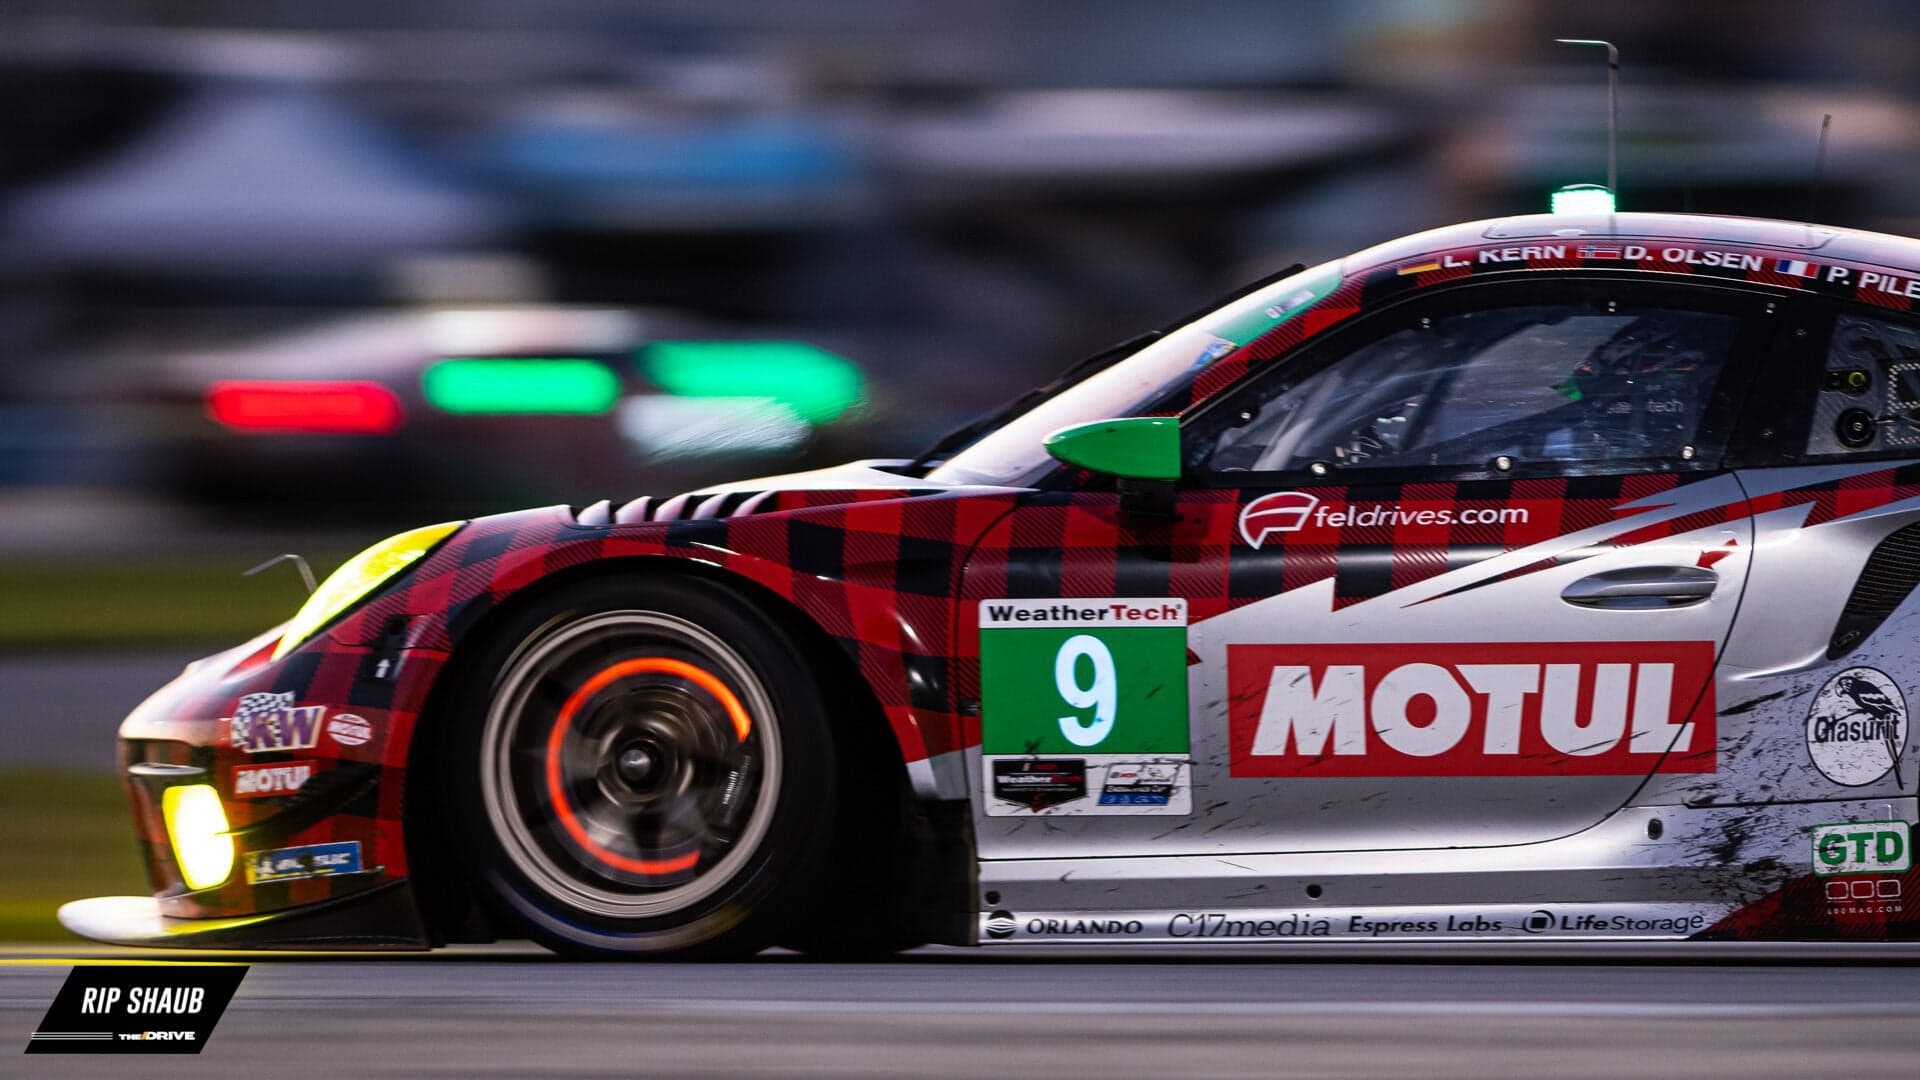 Track/Side: Here’s Your 2020 Rolex 24 at Daytona Mega Photo Gallery